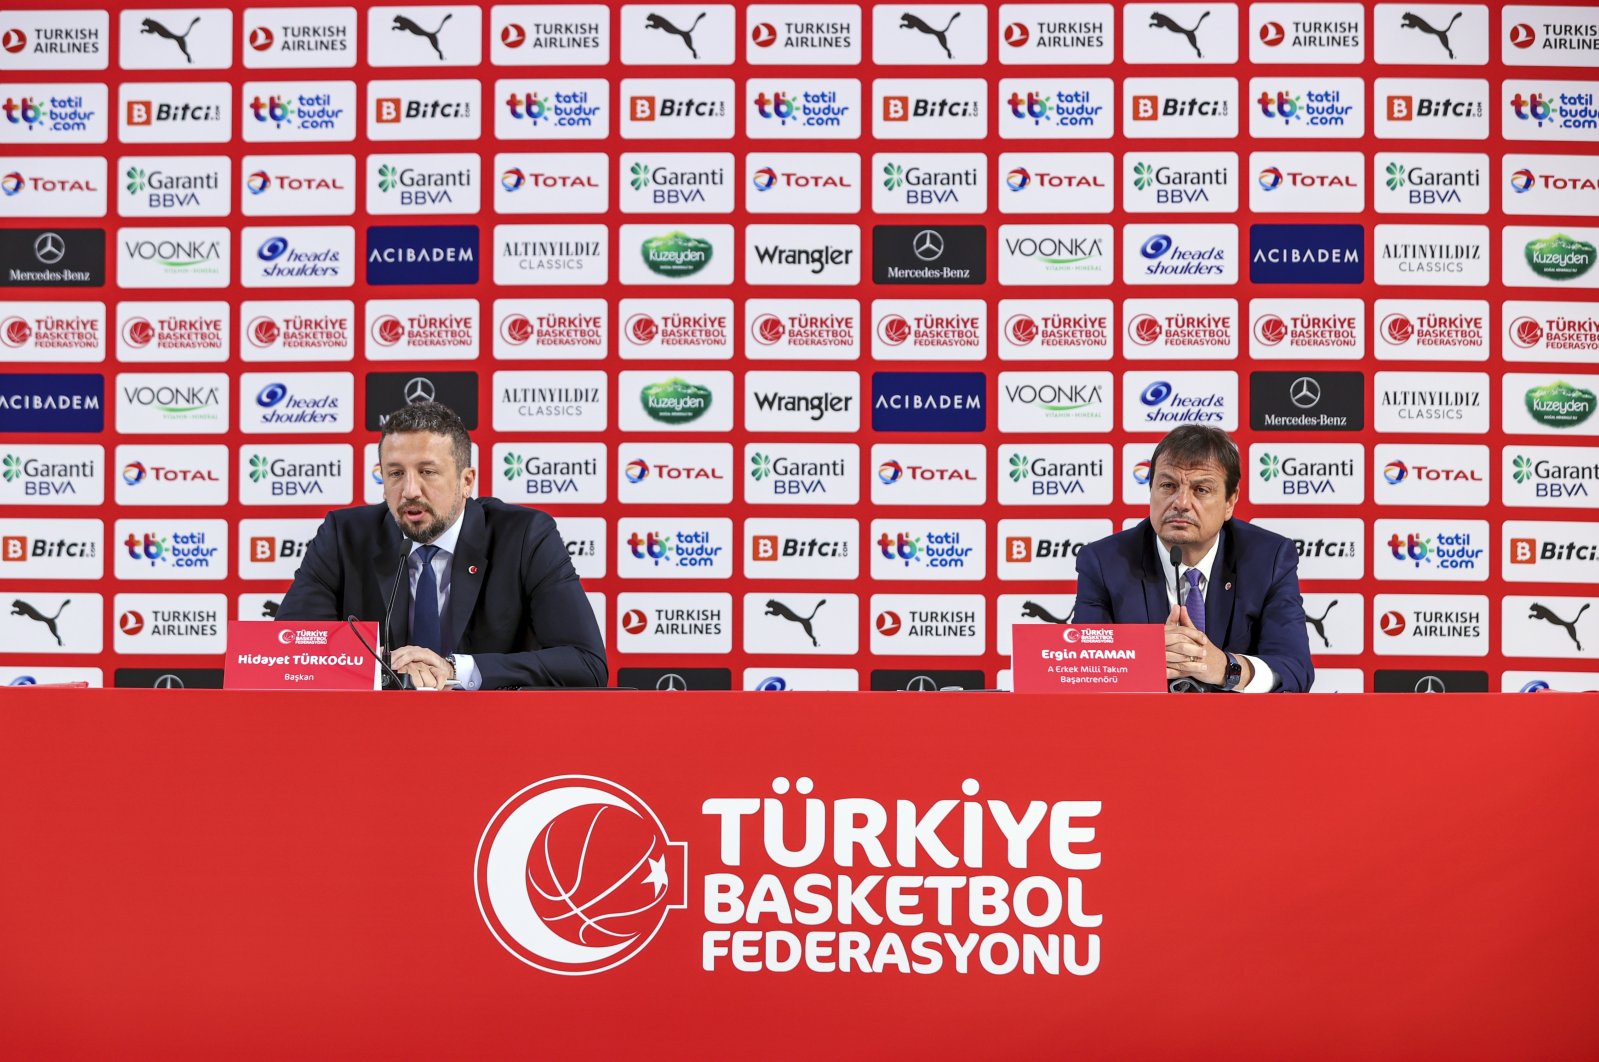 Turkish Basketball Federation (TBF) Chairperson Hidayet Türkoğlu (L) and newly-appointed coach Ergin Ataman speak during a press conference in Istanbul, Turkey, April 16, 2022. (AA Photo)